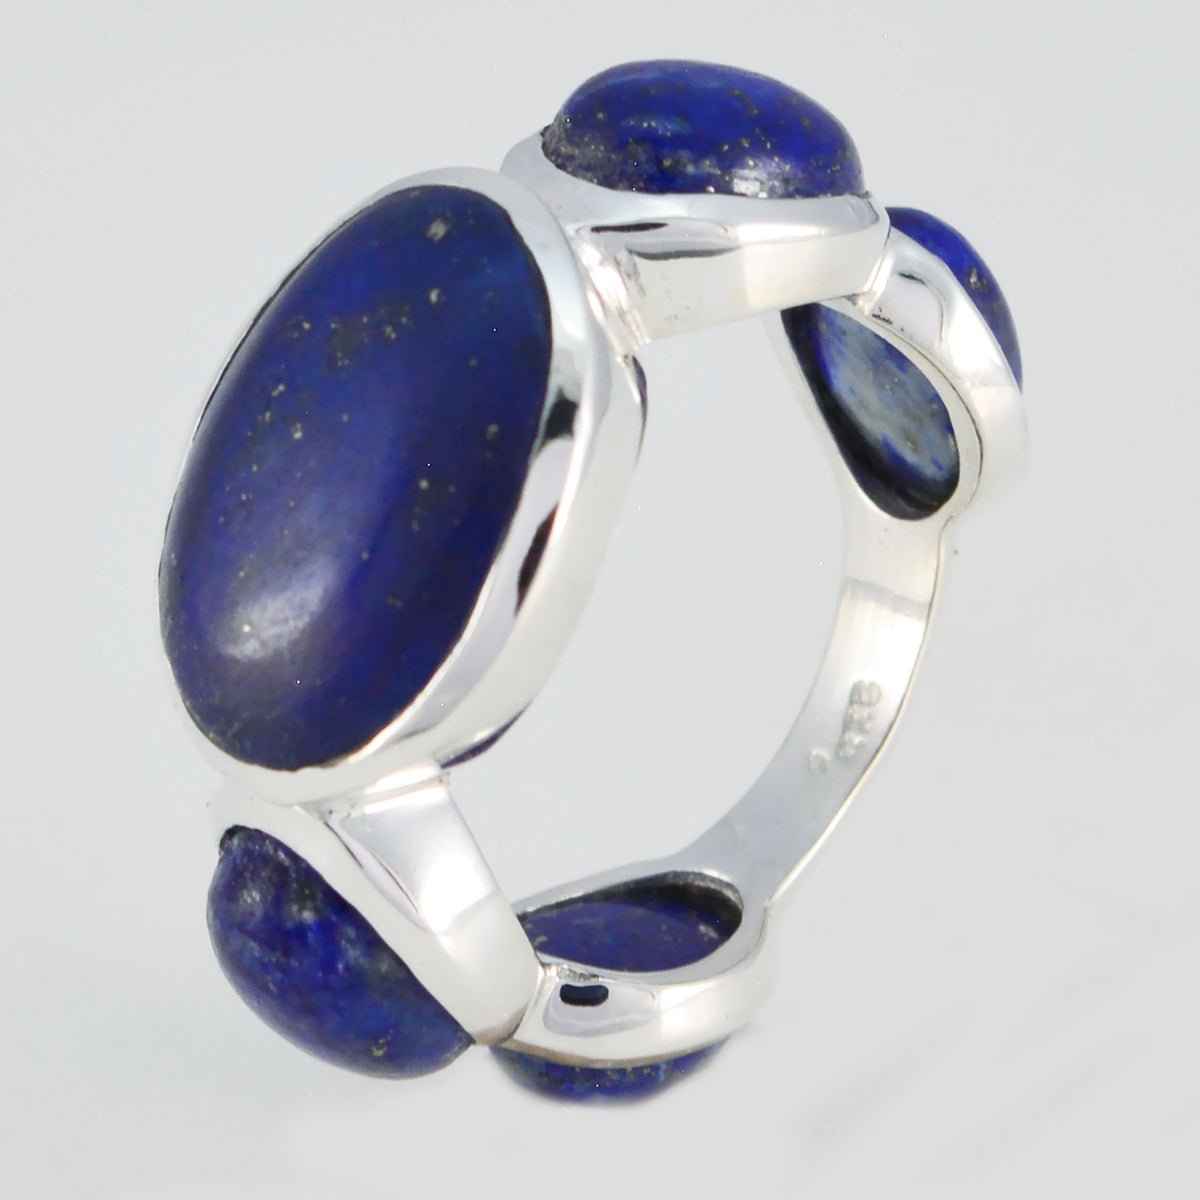 Magnetic Stone Lapis Lazuli Solid Silver Rings Statement Jewelry